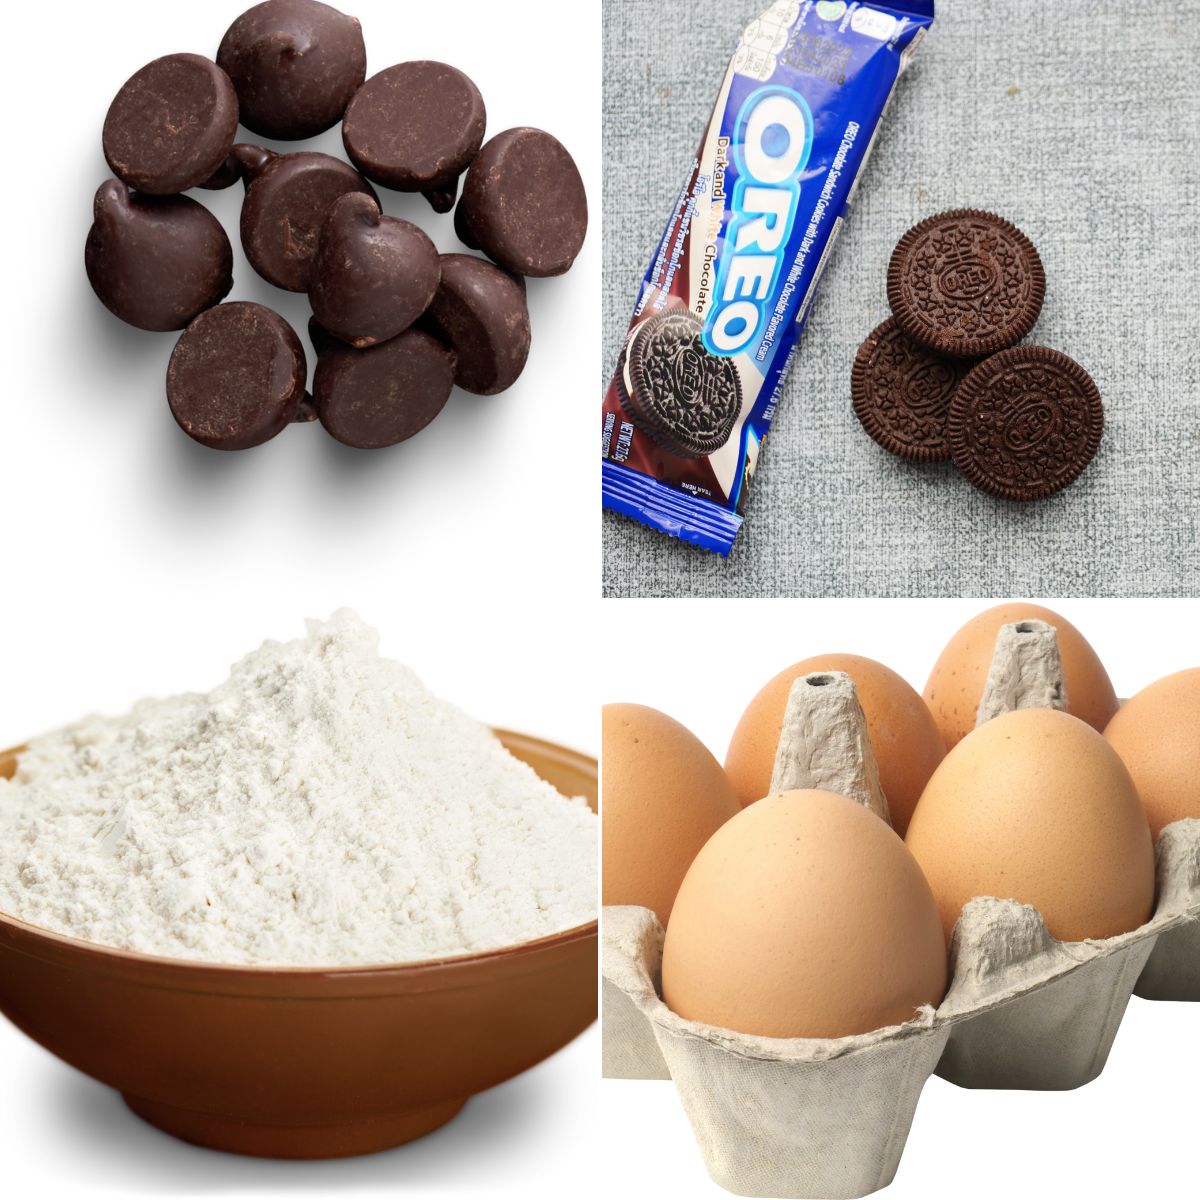 Oreo cookies, chocolate chips, flour and eggs.